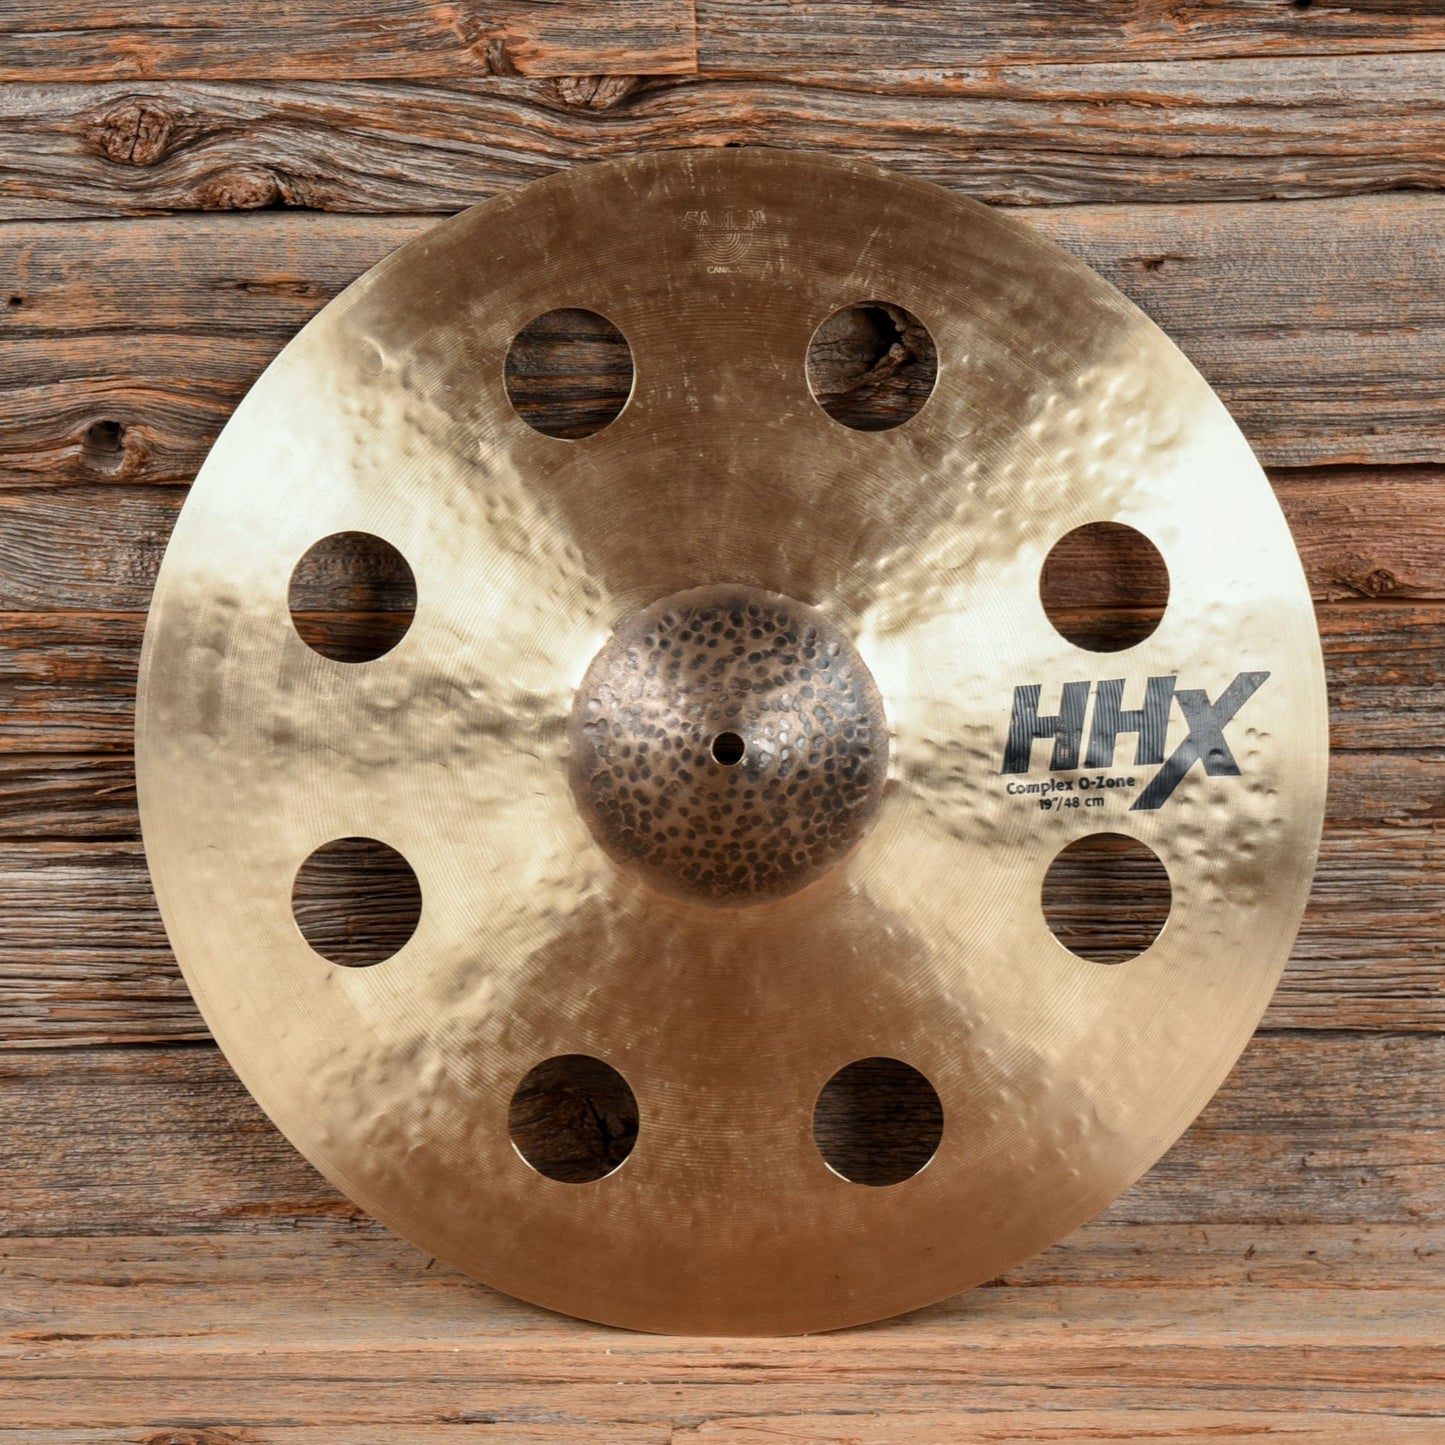 Sabian 19" HHX Complex O-Zone Crash Cymbal USED Drums and Percussion